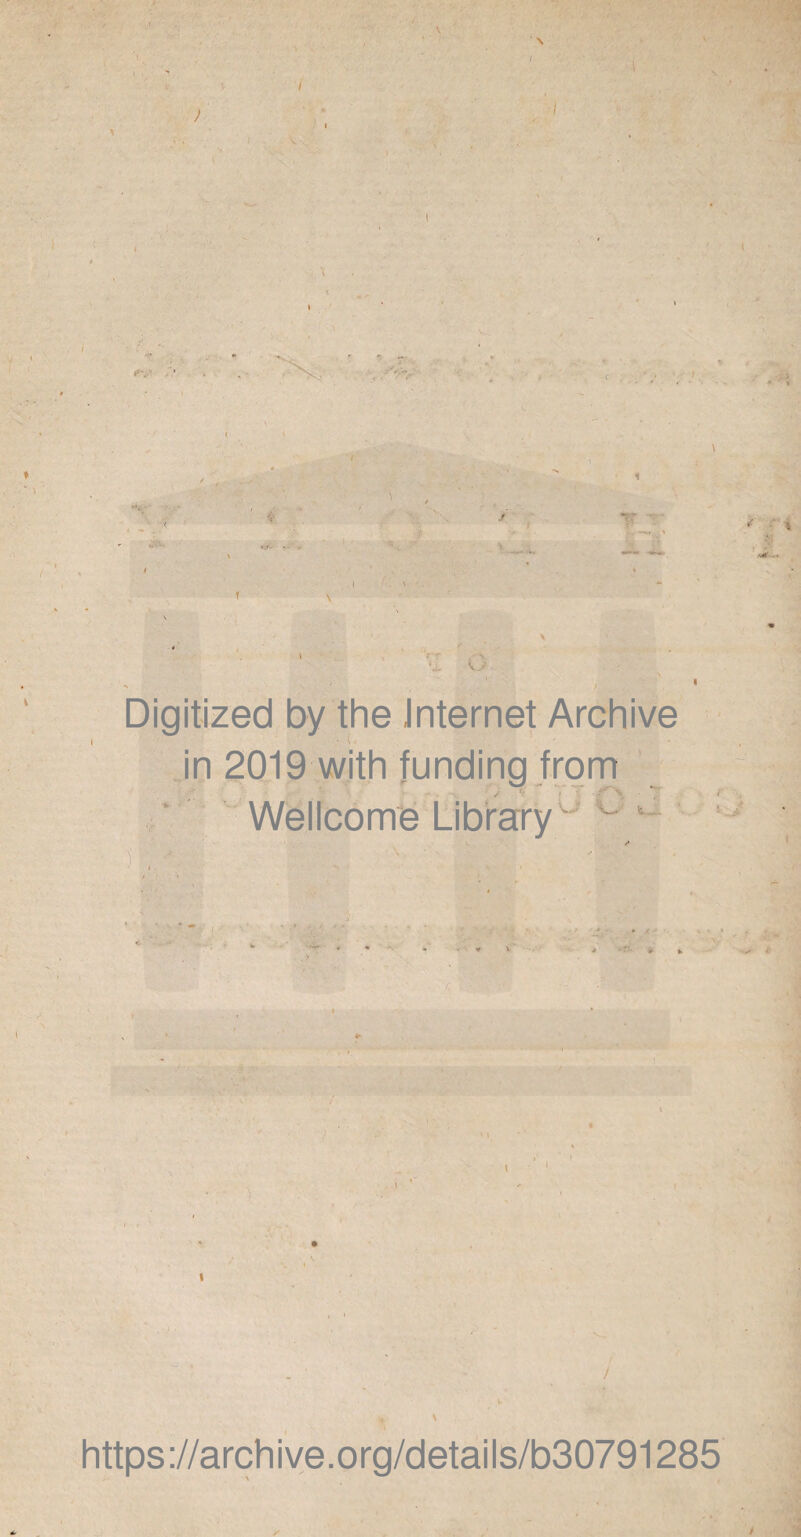 \ / I I Digitized by the Internet Archive in 2019 with funding from > V - 7 • . 7 Wellcome Library u 1 ! , ■' . ' ' https ://arch i ve. o rg/detai Is/b30791285